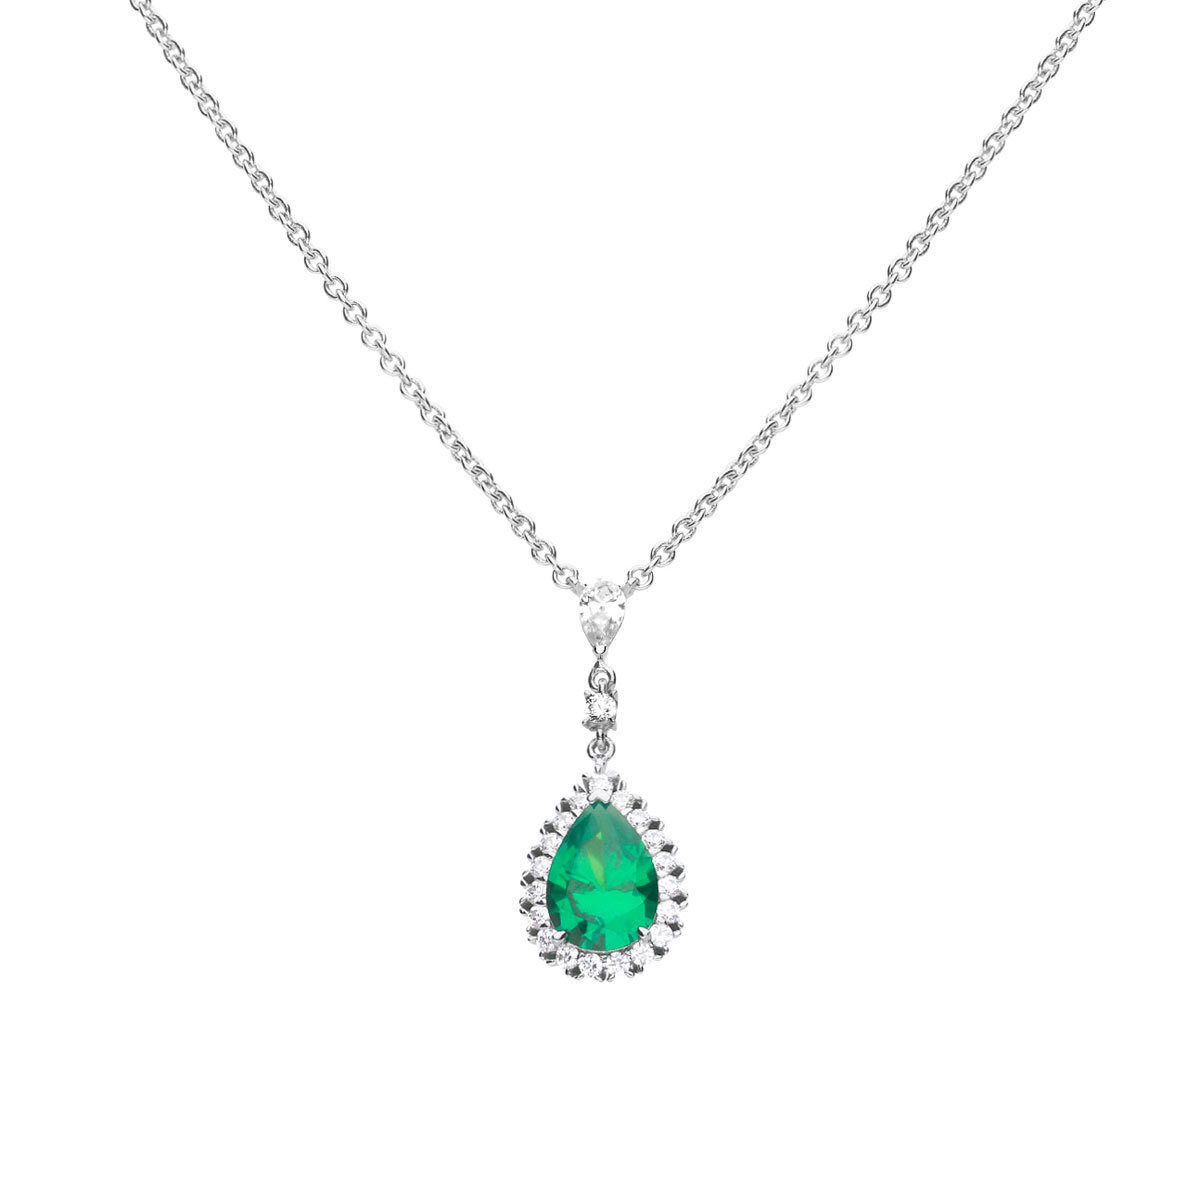 DiamonFire Sterling Silver Green Cubic Zirconia Teardrop Necklace With Pave Surround